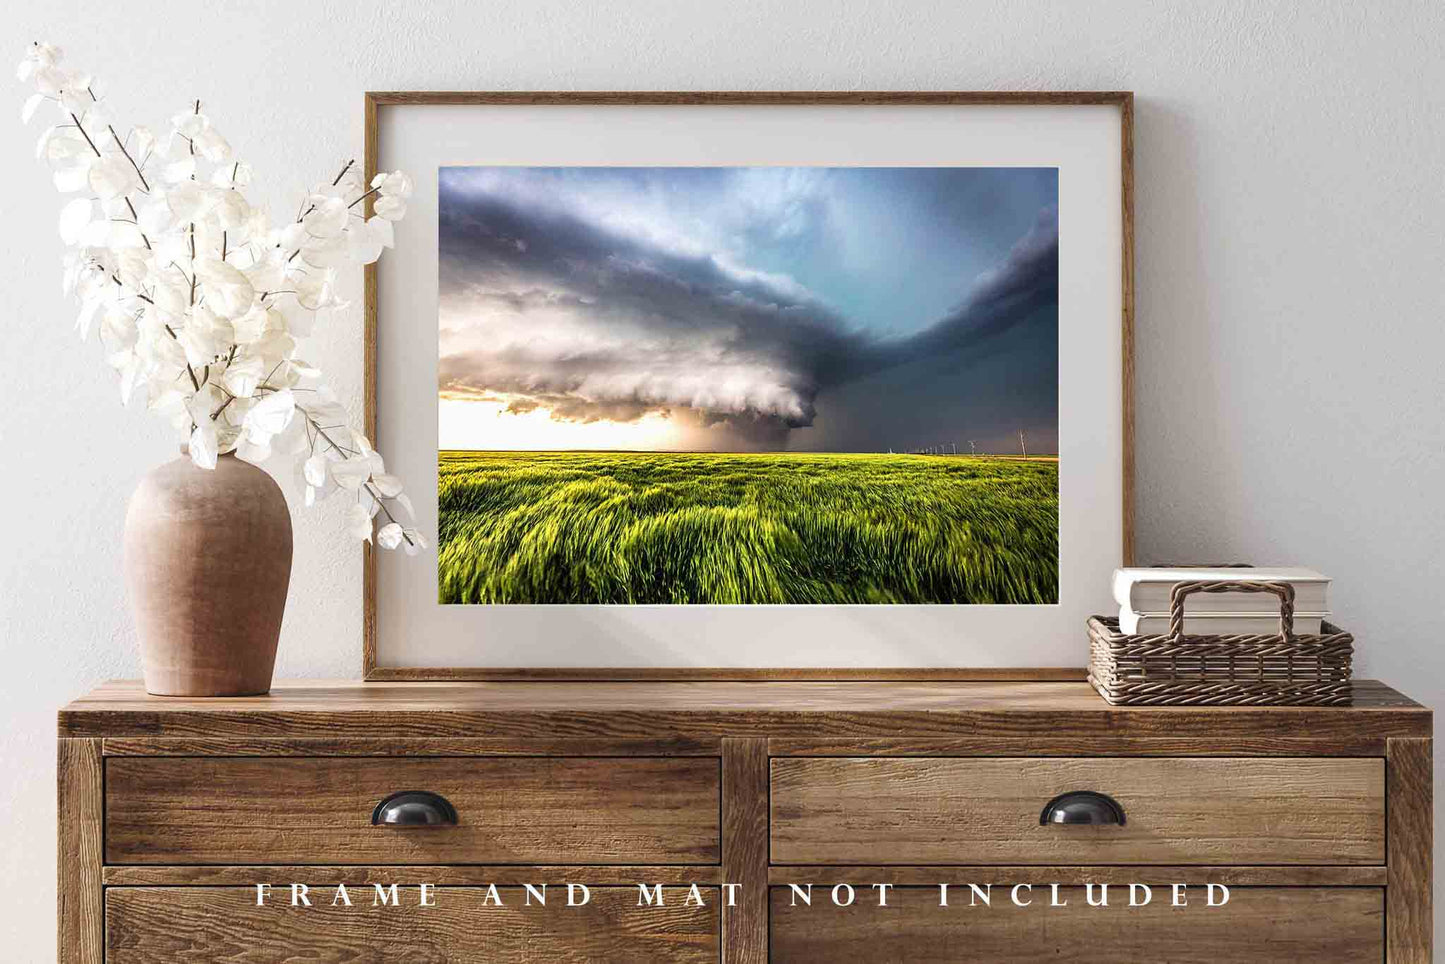 Supercell Thunderstorm Photography Print | Storm Picture | Kansas Wall Art | Weather Photo | Nature Decor | Not Framed